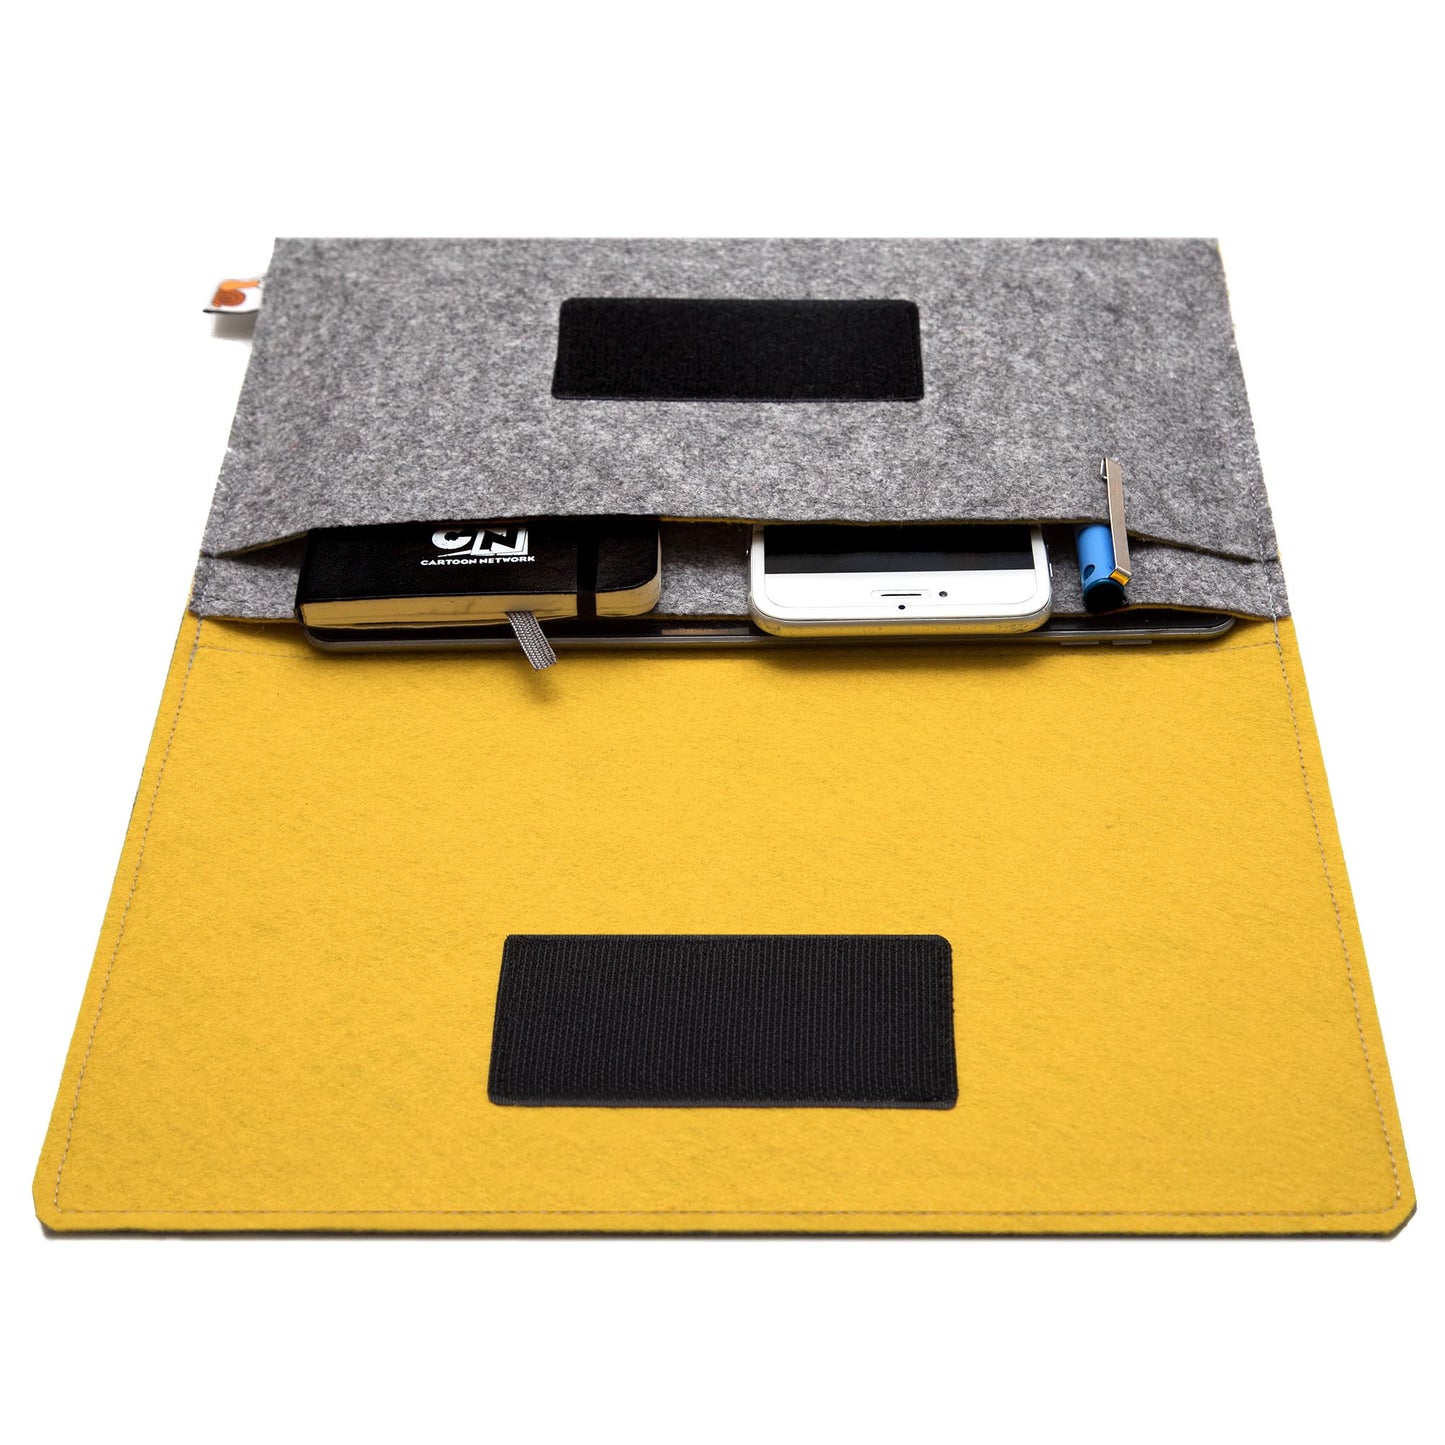 Premium Felt iPad Cover: Ultimate Protection with Accessories Pocket - Grey & Yellow